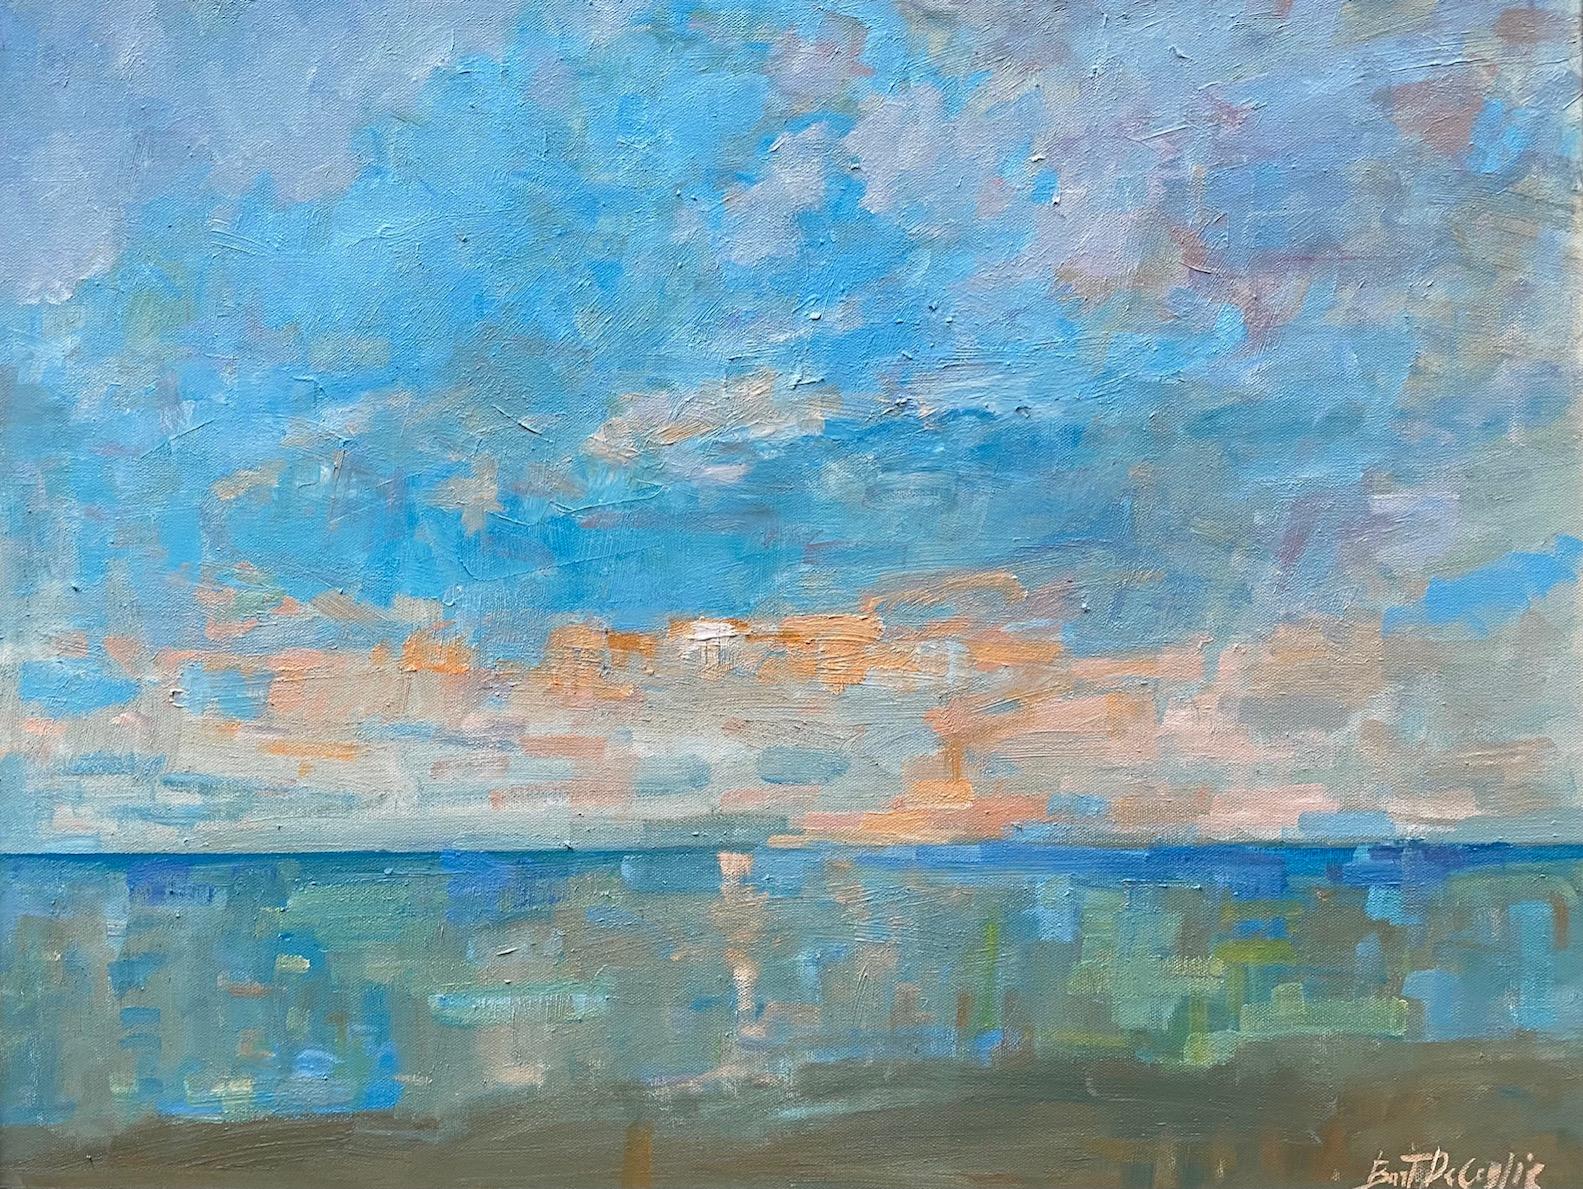 Early Morning in Summer, original 24x30 abstract marine landscape - Painting by Bart DeCeglie